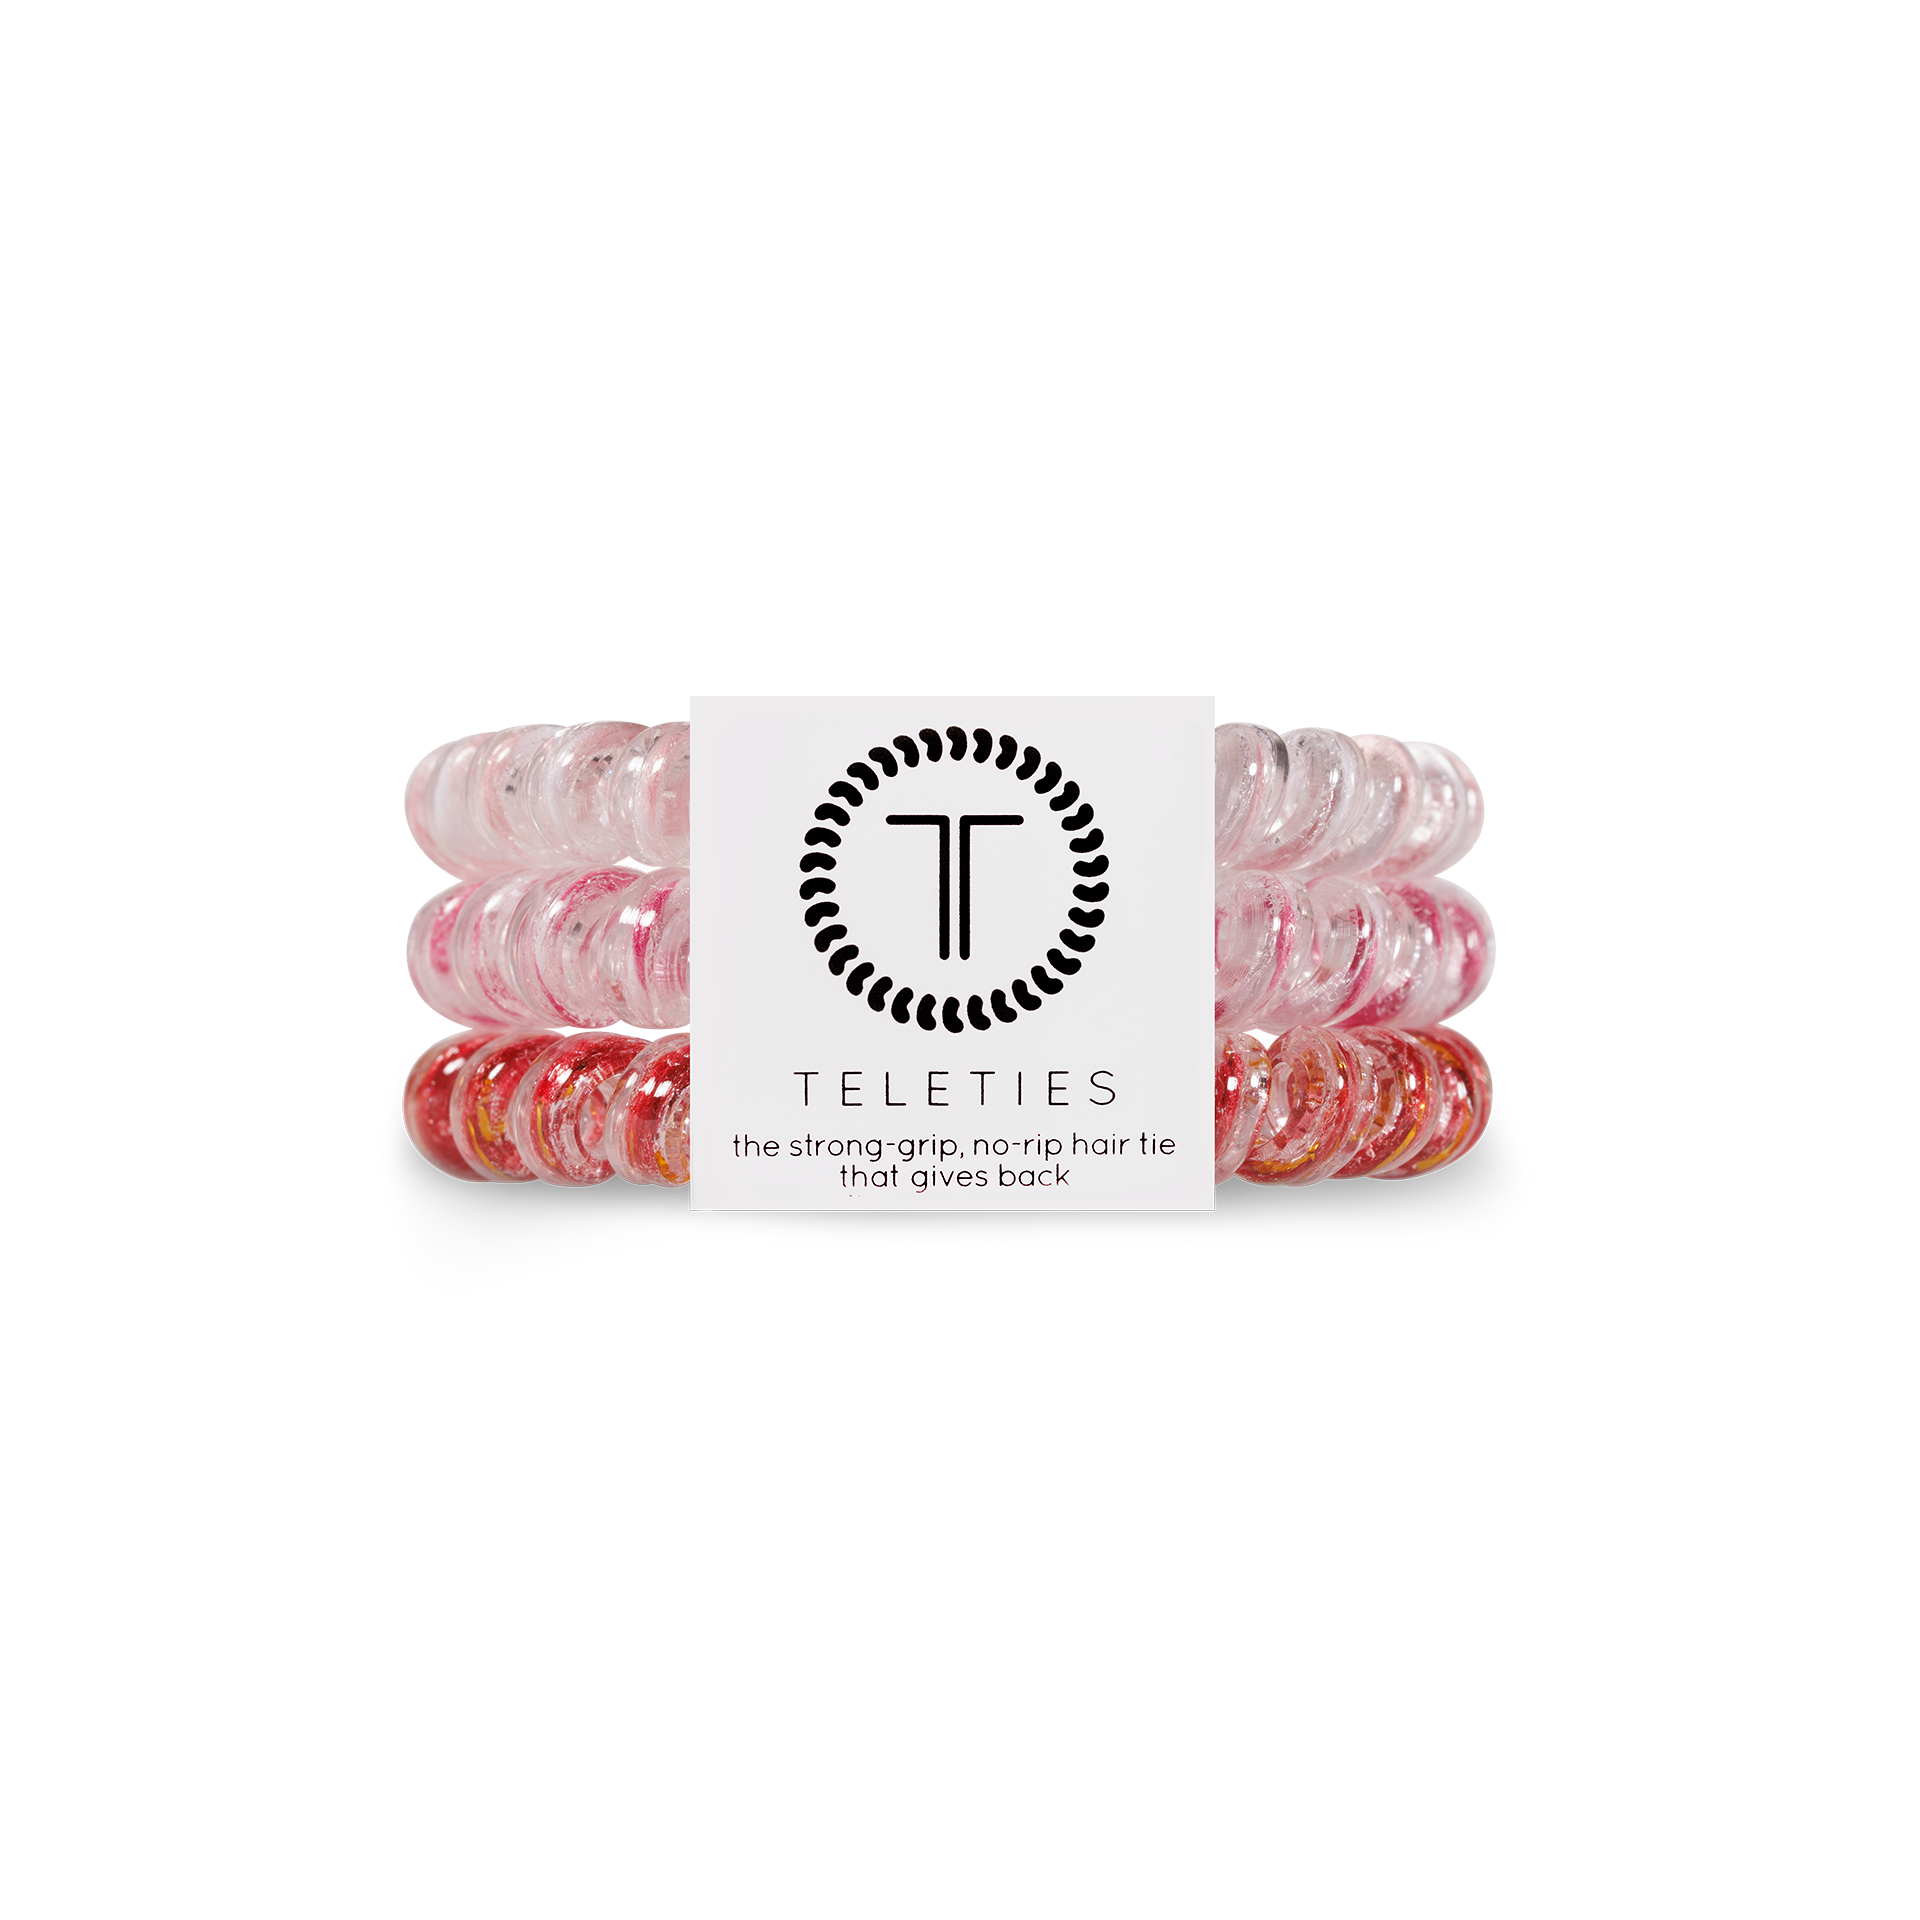 Teleties Hair Tie - Small Band Pack of 3 - Love Potion